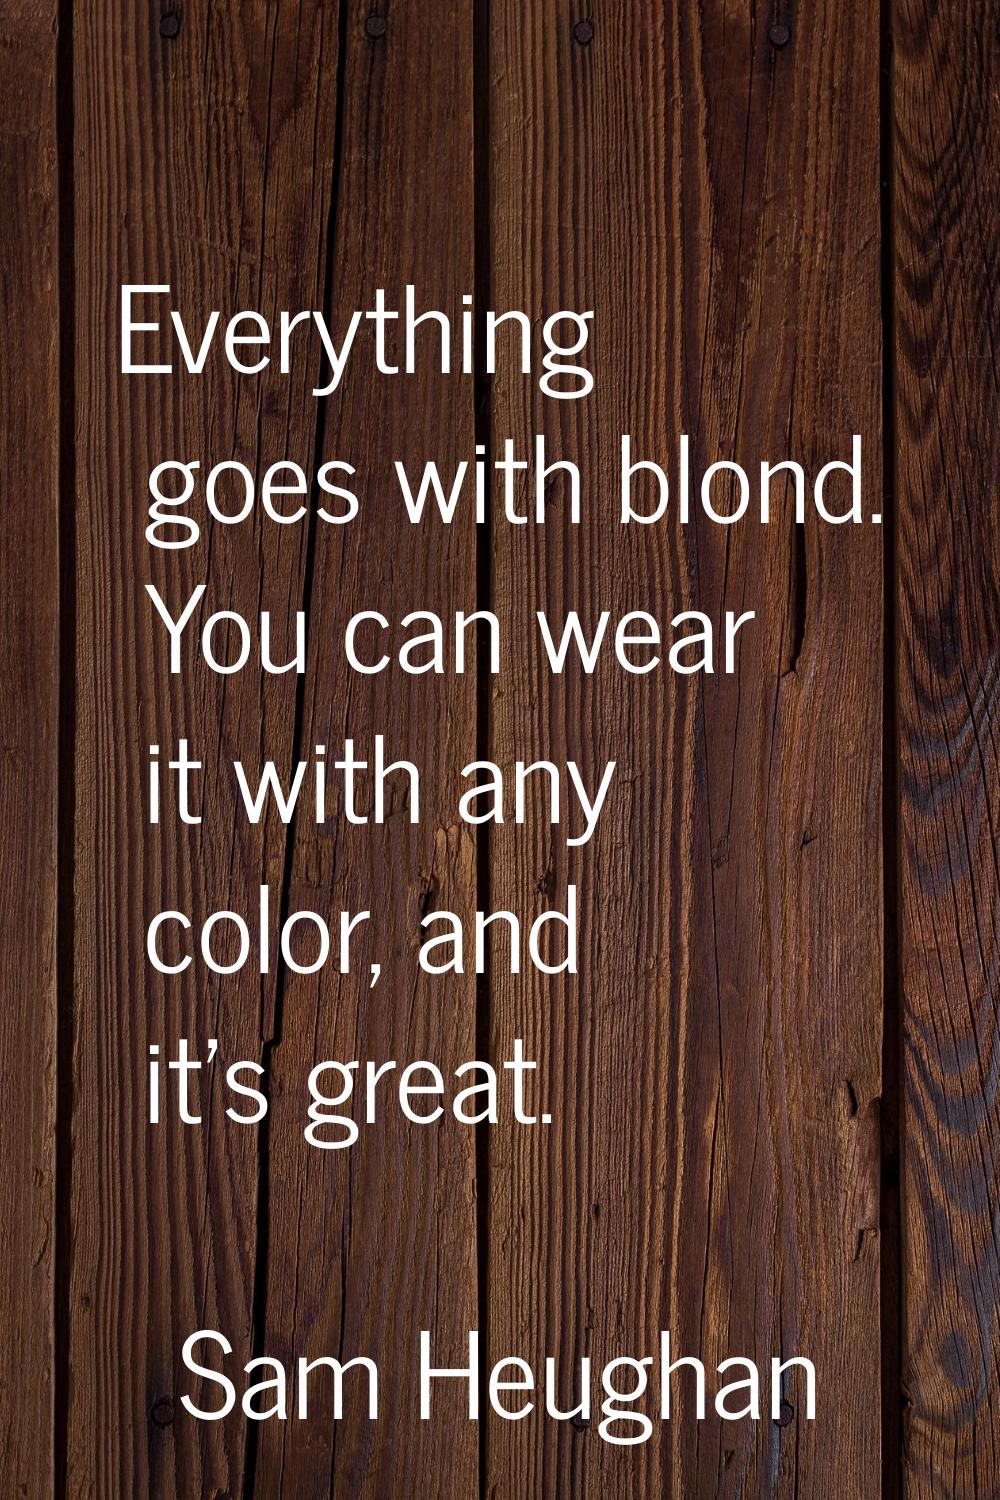 Everything goes with blond. You can wear it with any color, and it's great.